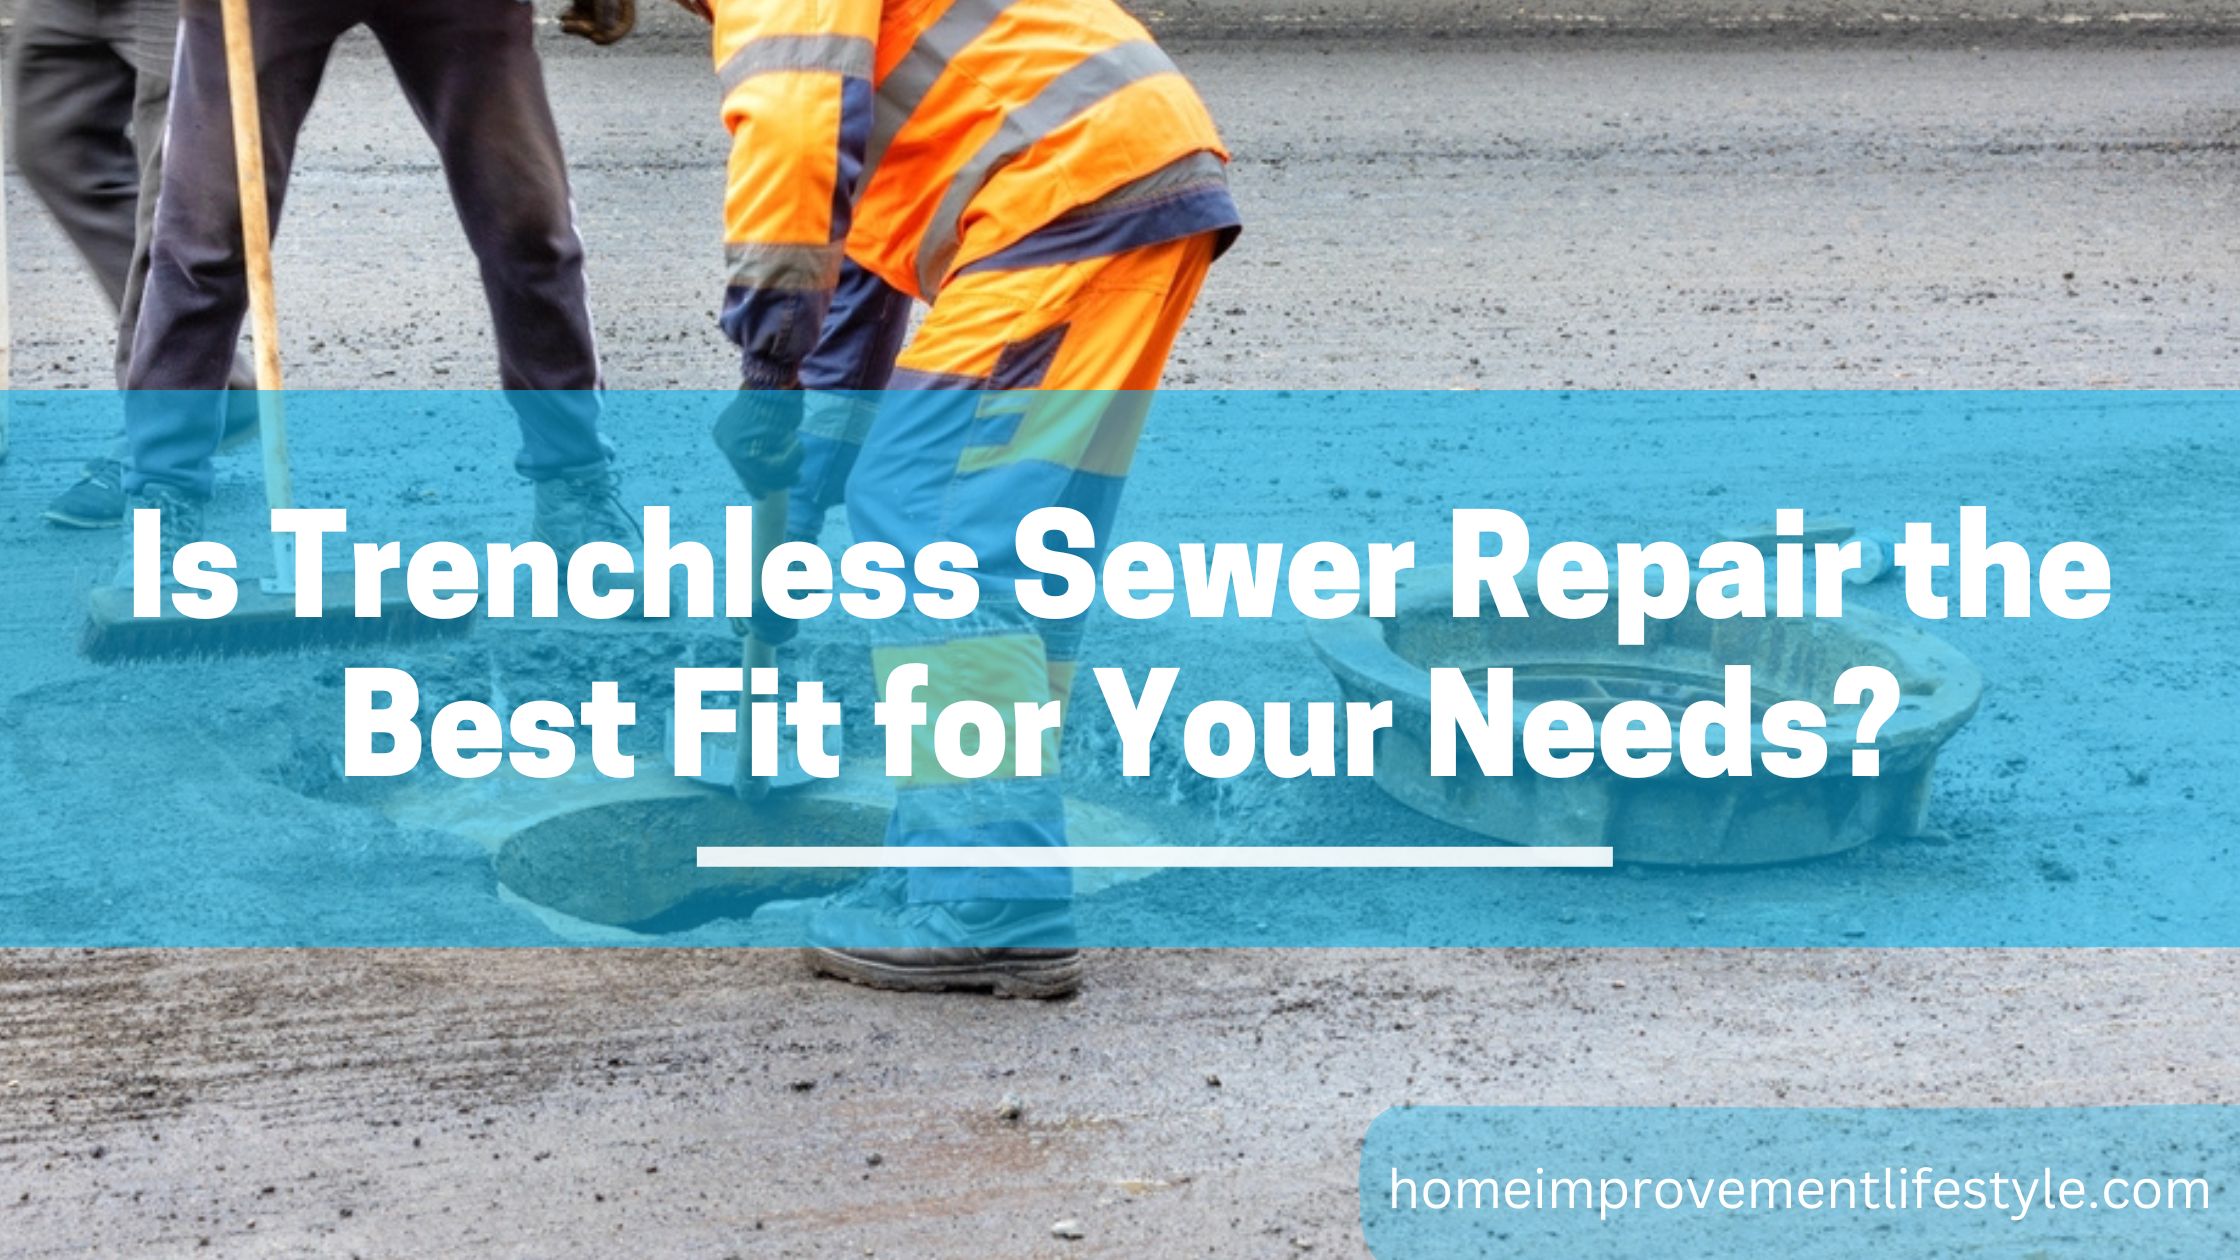 Is Trenchless Sewer Repair the Best Fit for Your Needs?